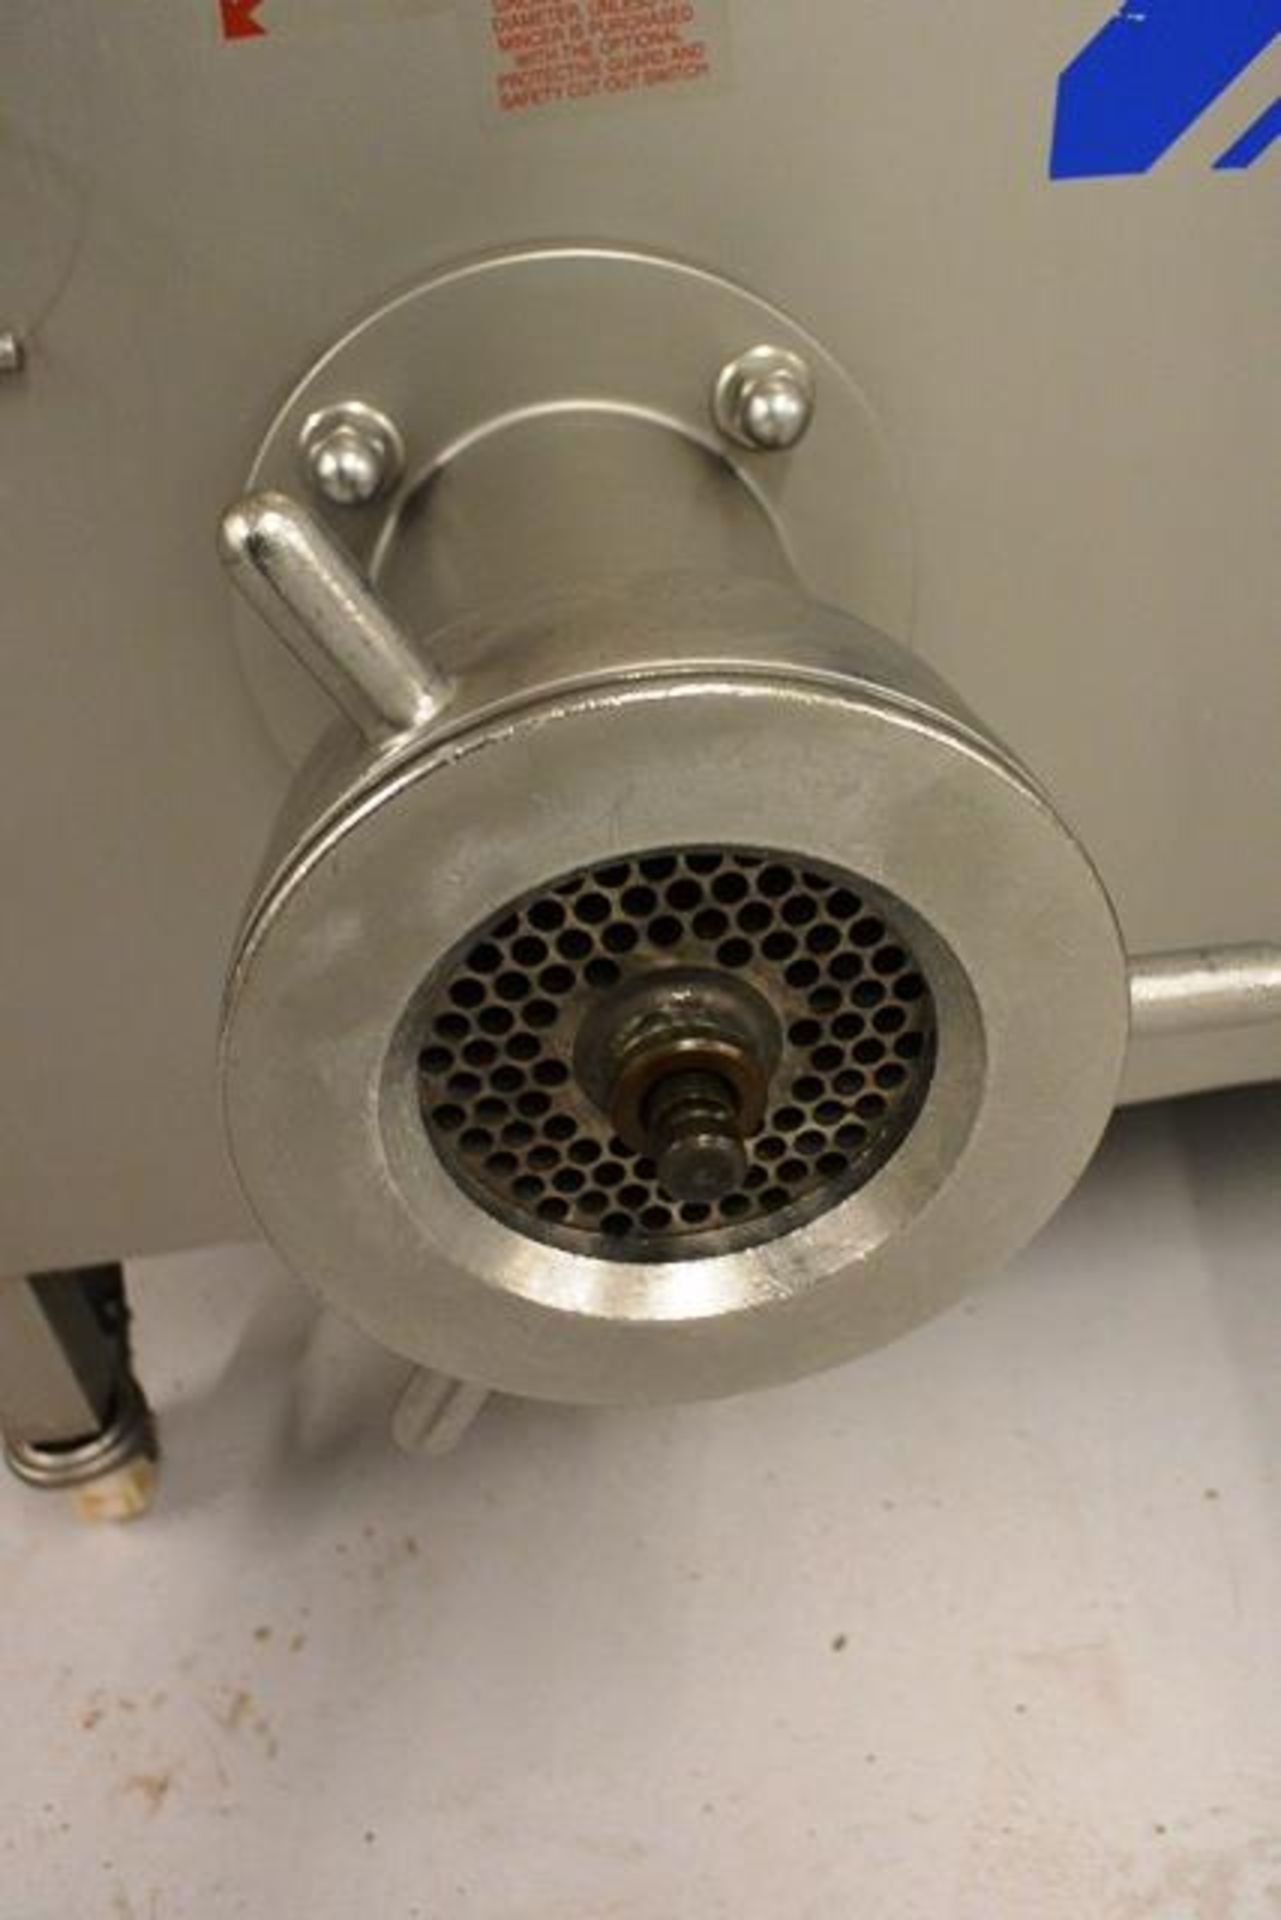 Thompson 3000 stainless steel meat grinder, serial no: 3000 M12.64 (2014), 3 phase, mounted on - Image 5 of 5